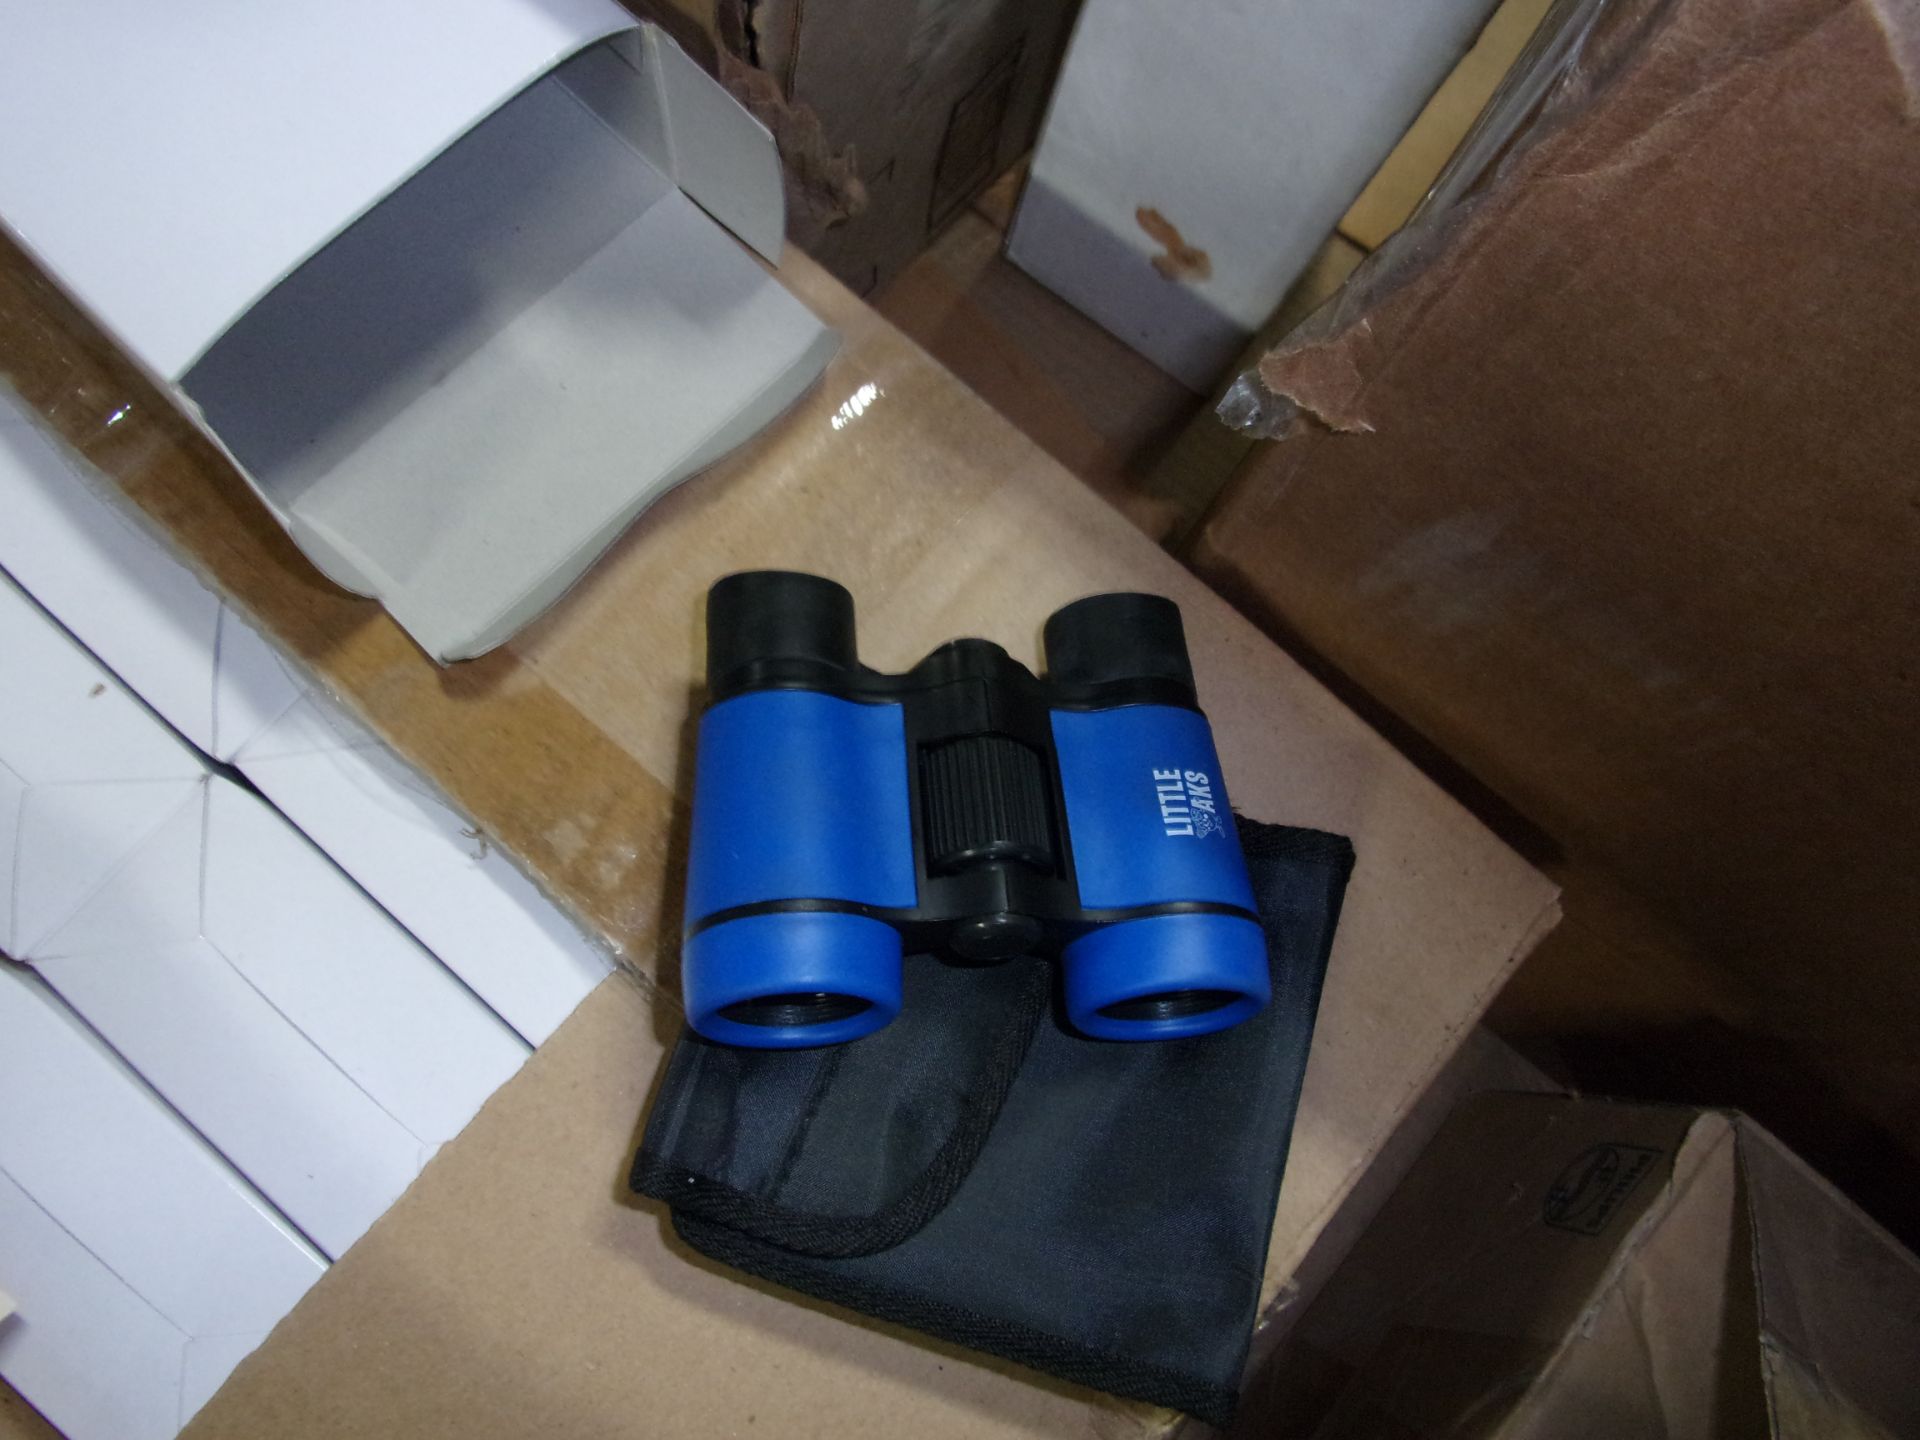 LOT OF (1) BOX INCLUDING LITTLE ASK 4 X 30 BINOCULARS - Image 2 of 2